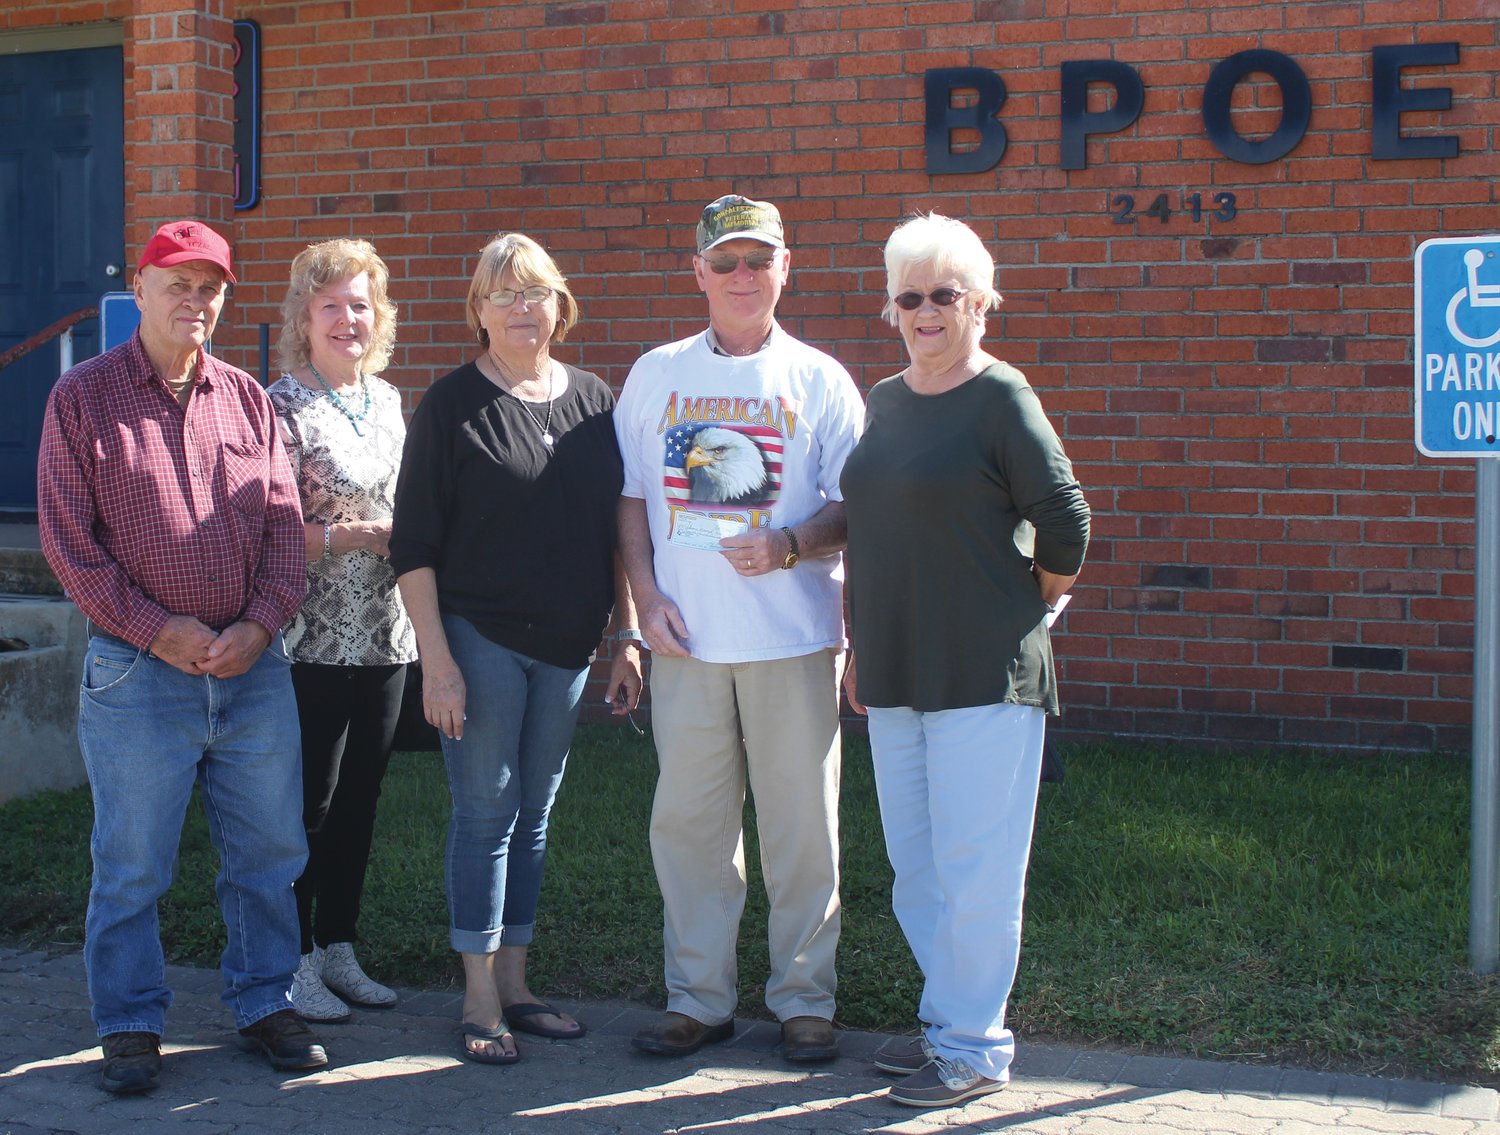 Presenting and representing First Shot Cookoff-Elks, with a donation of $1,500 to Veterans Memorial are Joe Kotwig, Mary Ann Day, Lori Behlen and Shirley Breitschopf. Accepting the check for Veterans is Larry Mercer.